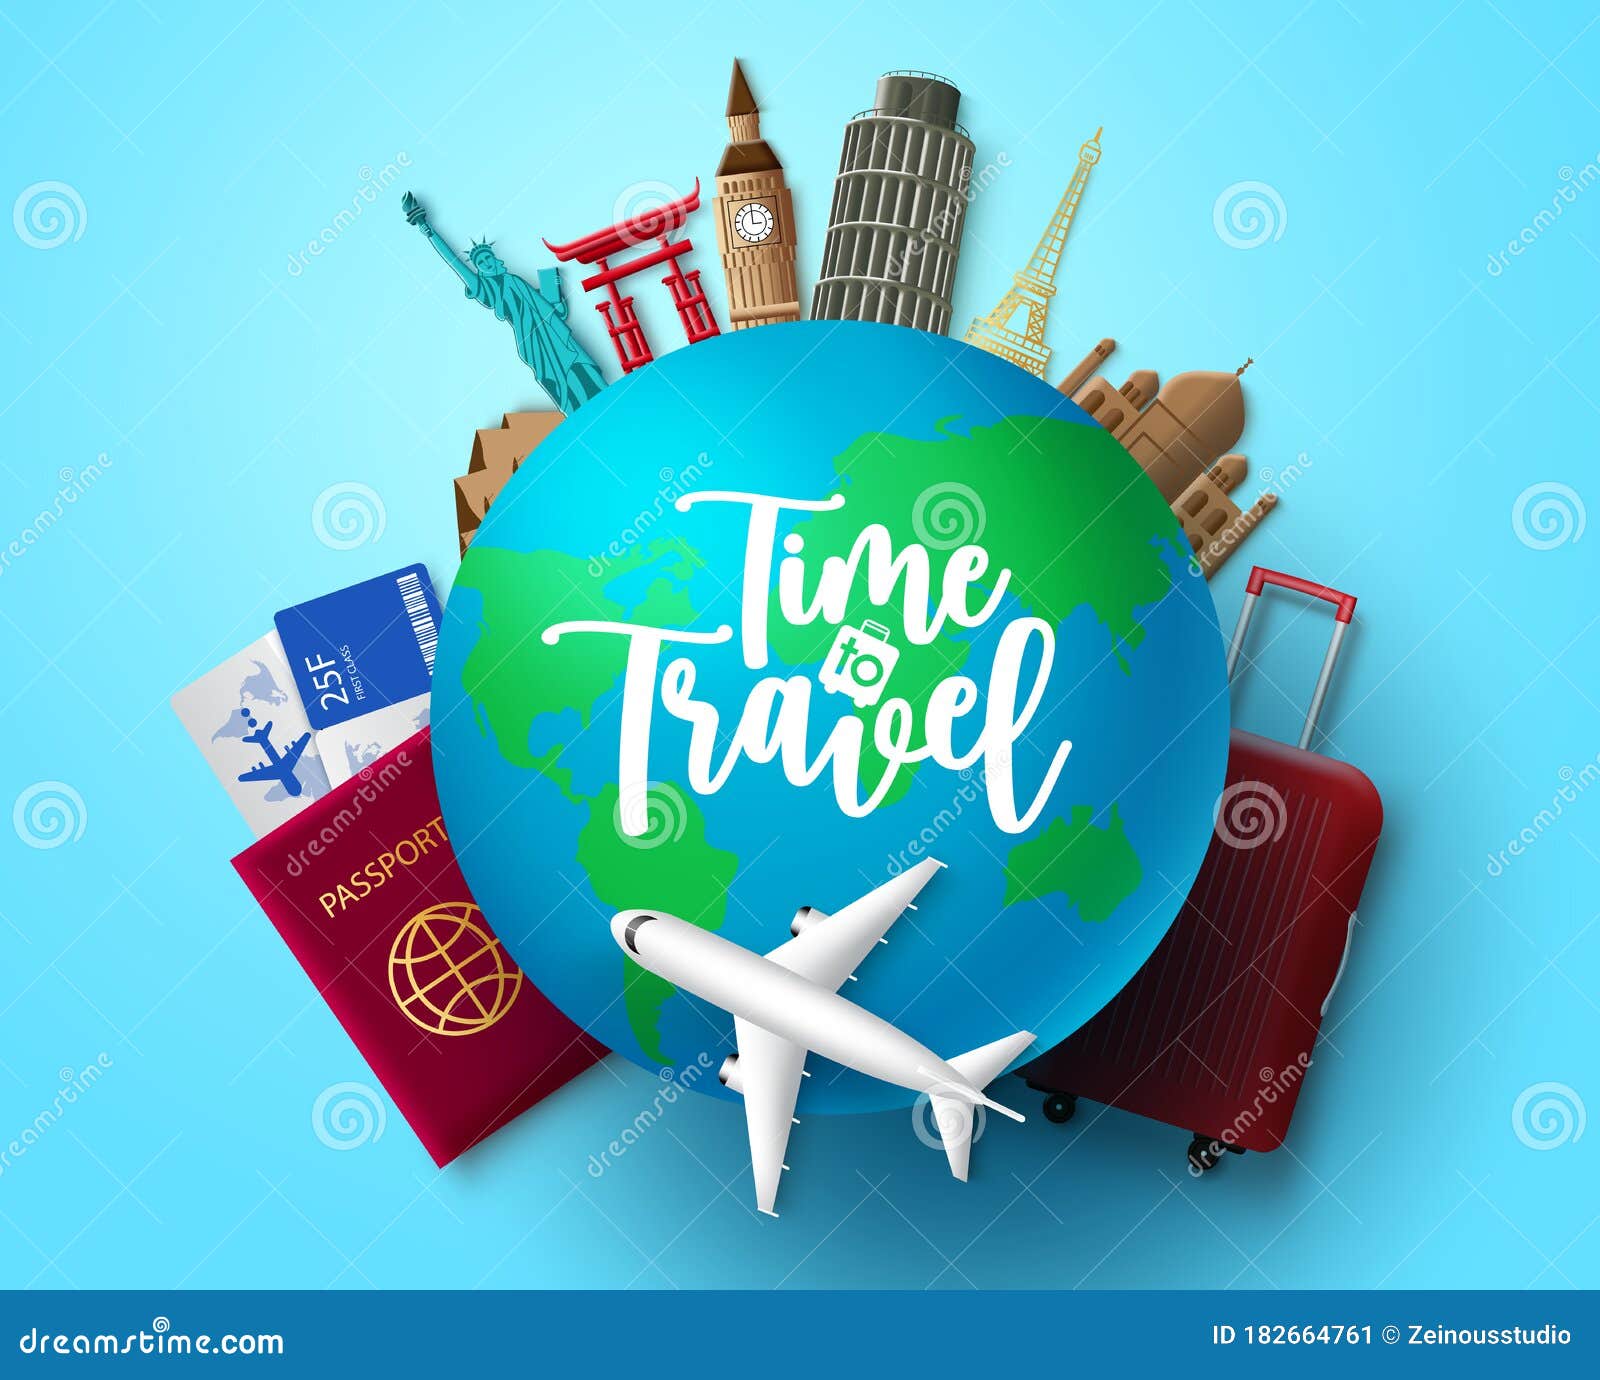 Time To Travel Vector Concept Design. Time To Travel Text